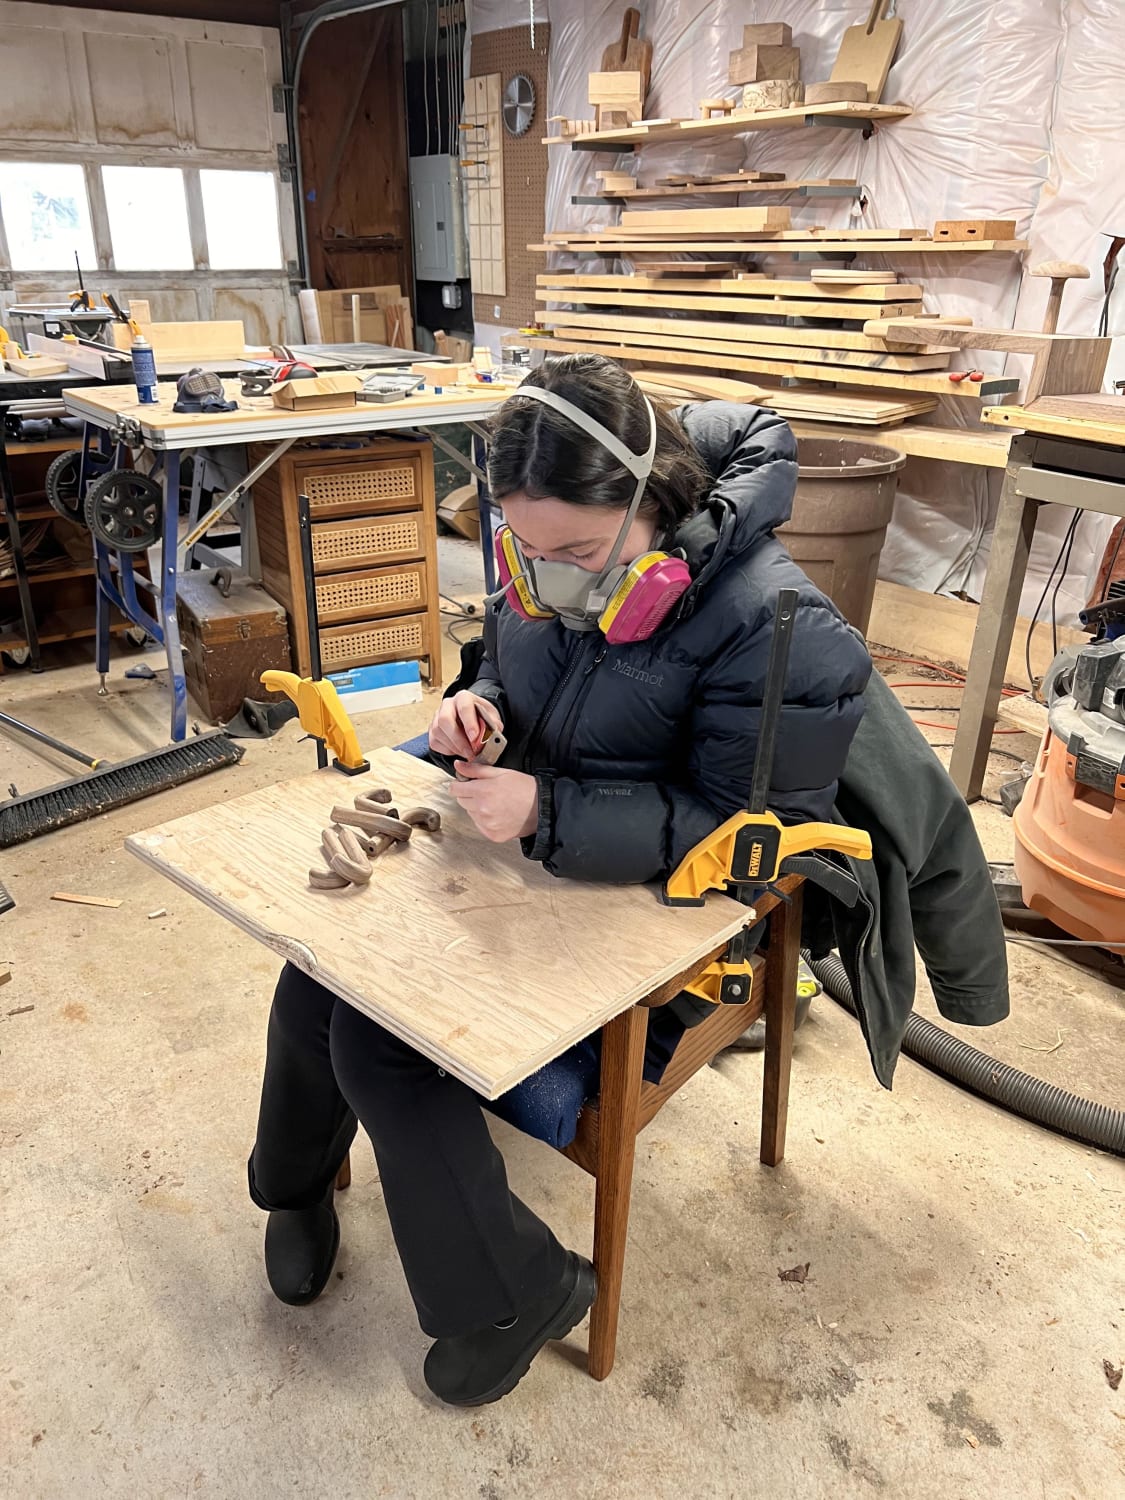 Cerebral Palsy won’t stop this woodworker! Strapped in with some clamps and workbench for safe working.